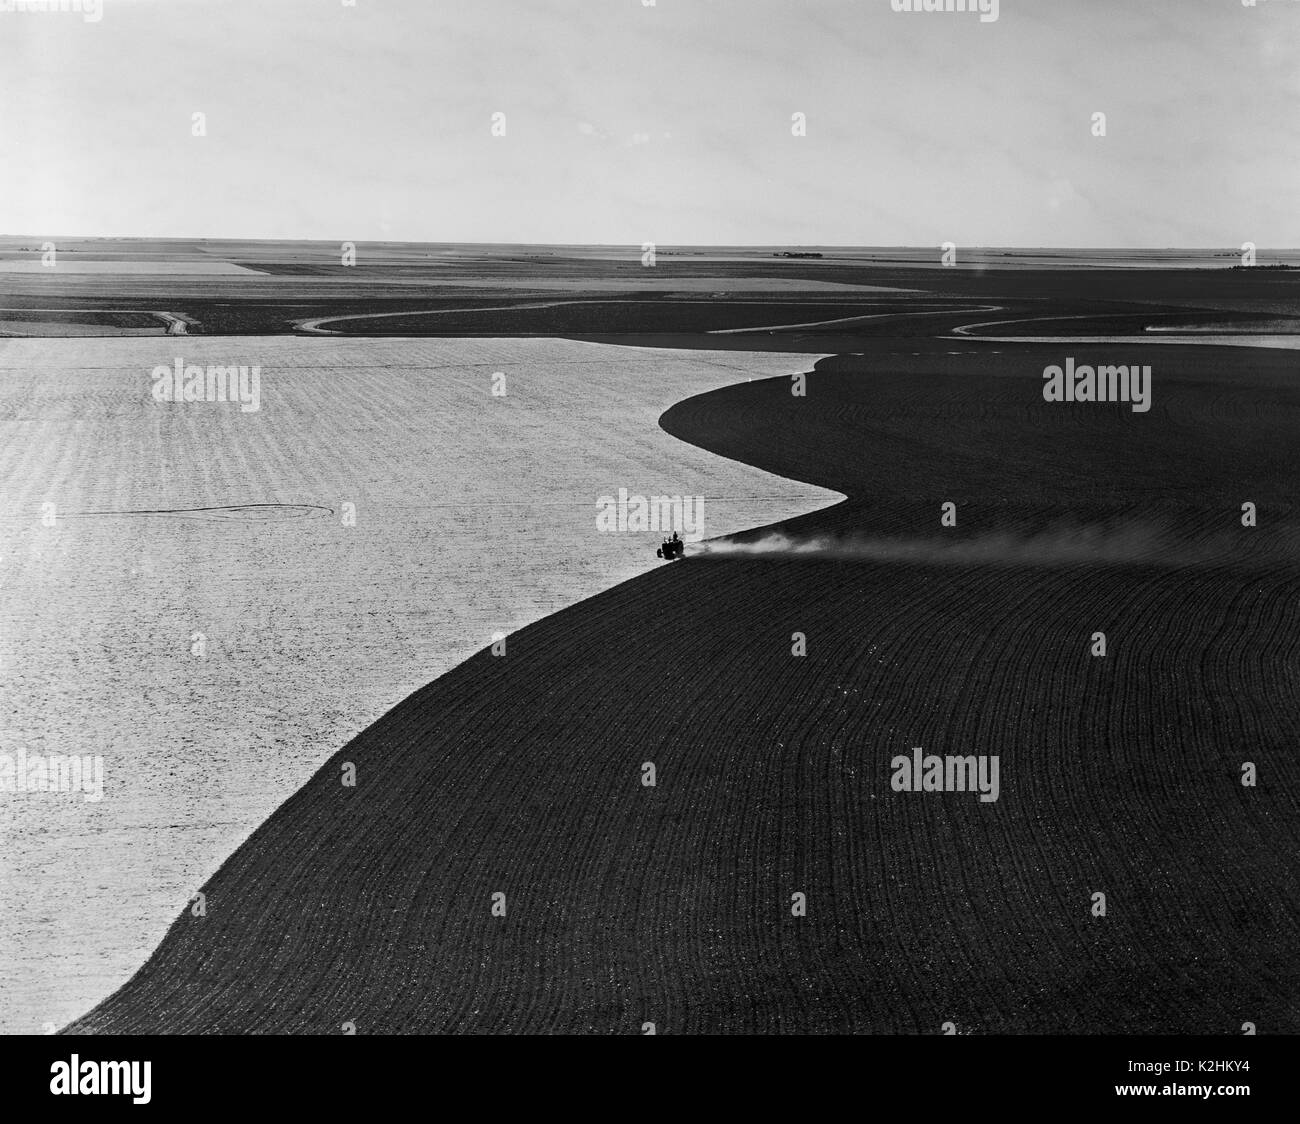 AERIAL VIEW OF TRACTOR TILLING FIELD Stock Photo